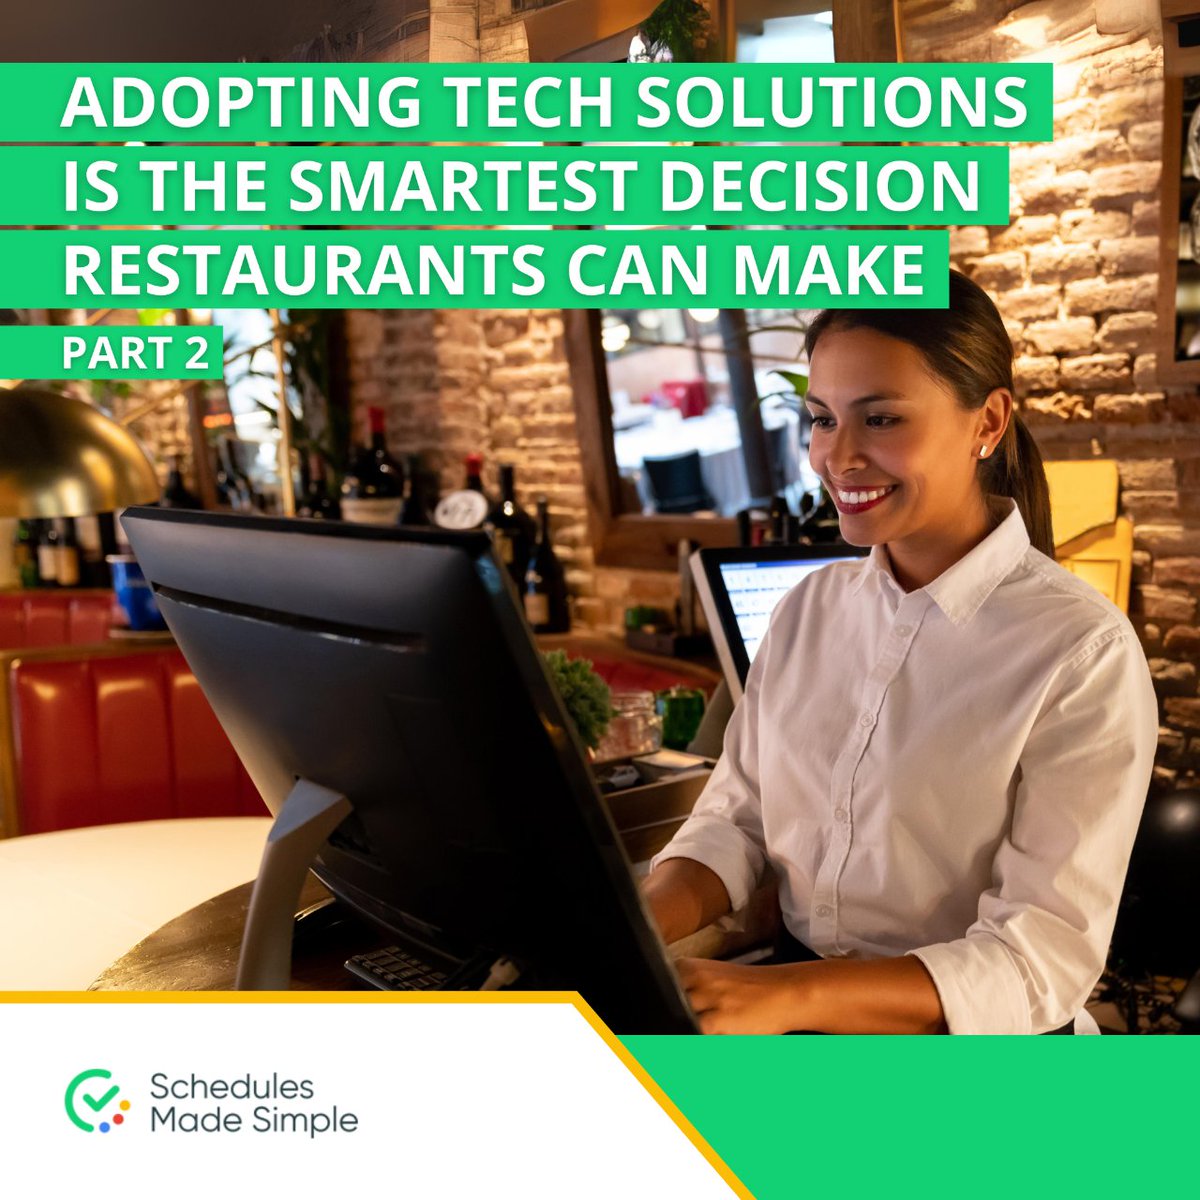 Adopting tech solutions is an excellent idea...

We've already established that in a previous post.

But what type of impact does it have on a restaurant?

[Read more in the thread]

#TechSolutions #RestaurantTech #DigitalTransformation #RestaurantManagement #BusinessInnovation